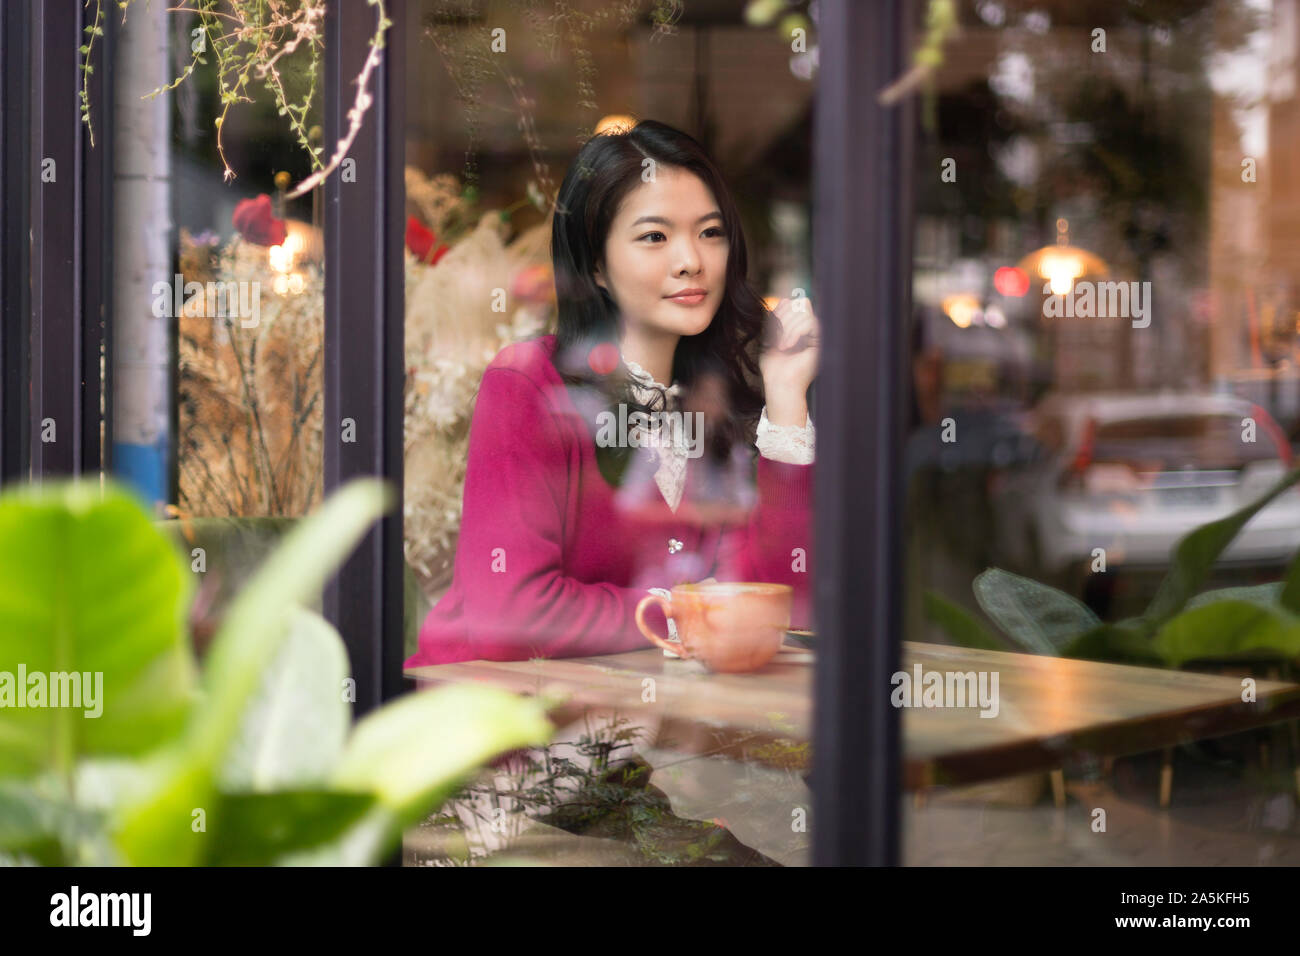 Woman sitting at wooden table in cafe Stock Photo